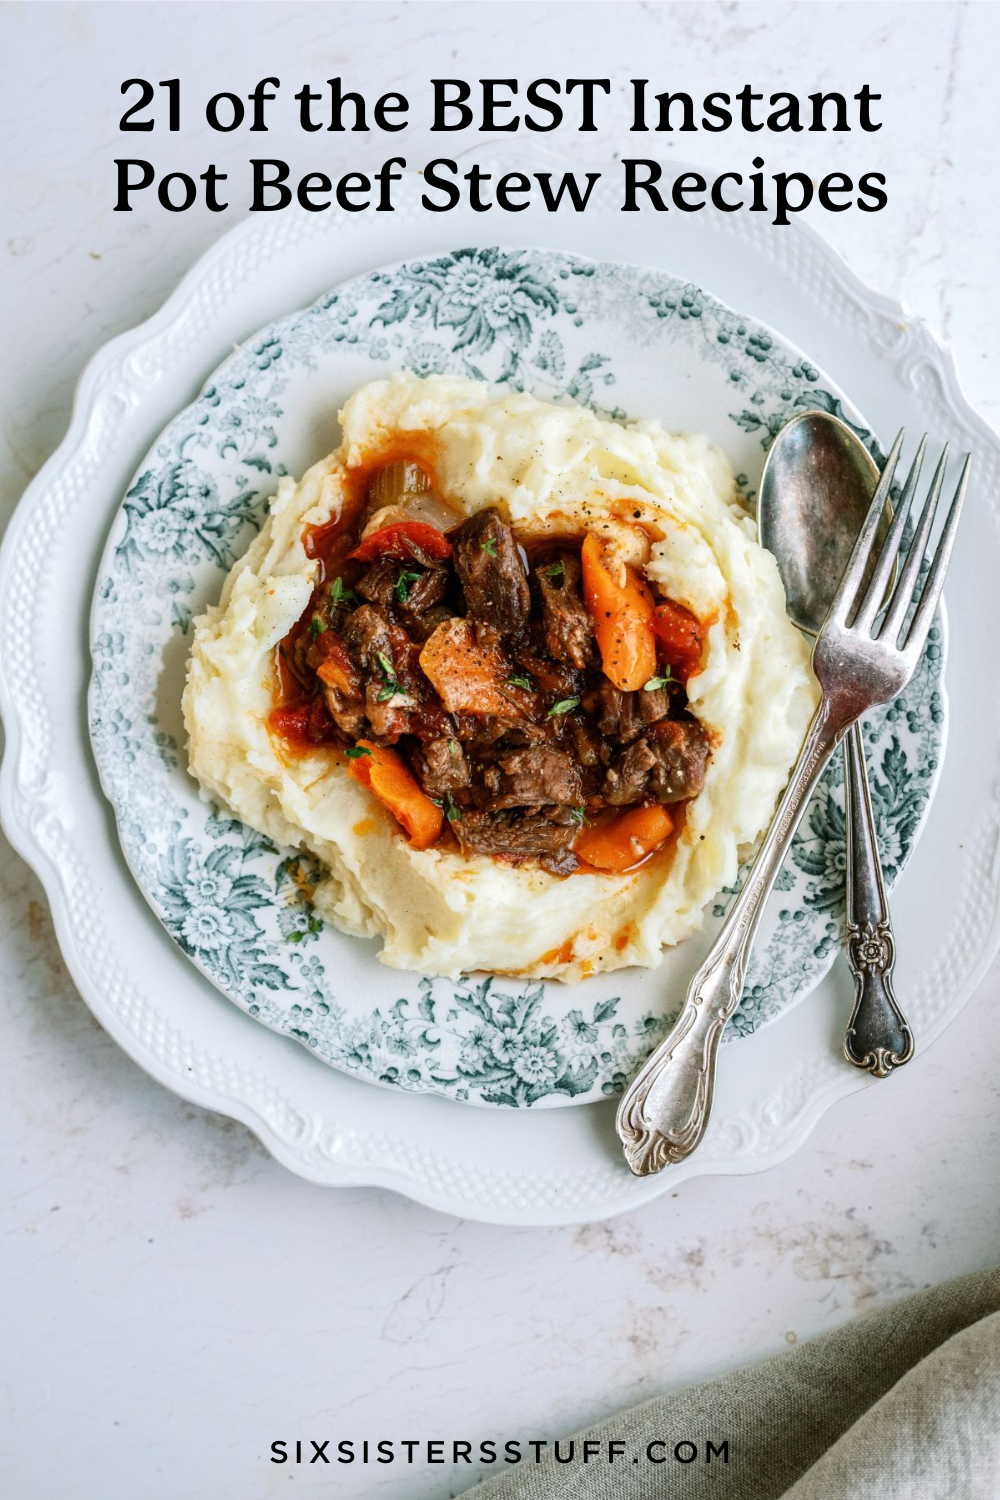 21 of the BEST Instant Pot Beef Stew Recipes